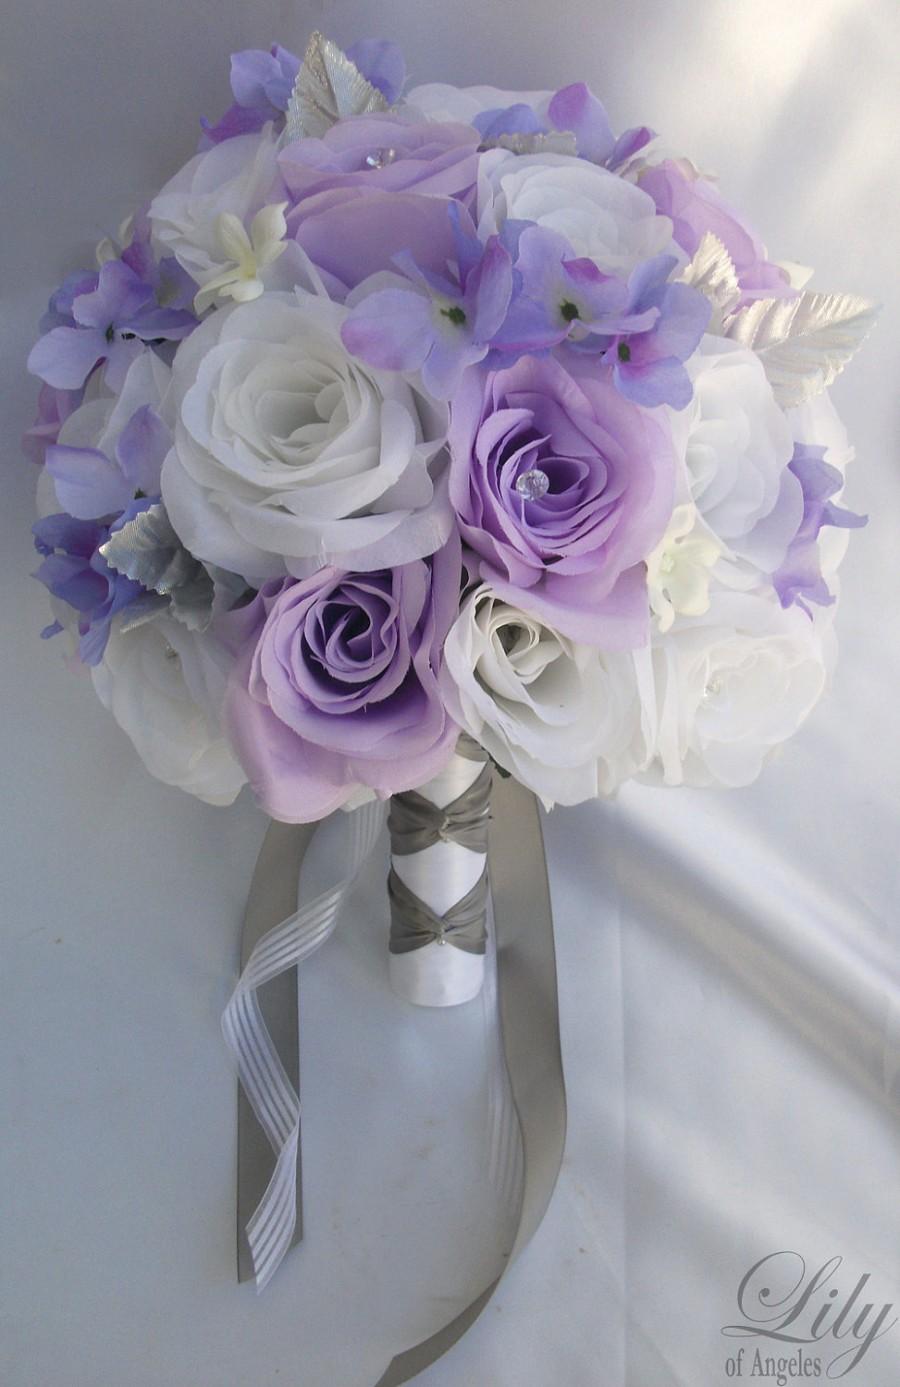 Mariage - 17 Piece Package Wedding Bridal Bride Maid Of Honor Bridesmaid Bouquet Boutonniere Corsage Silk Flower WHITE LAVENDER "Lily Of Angeles"